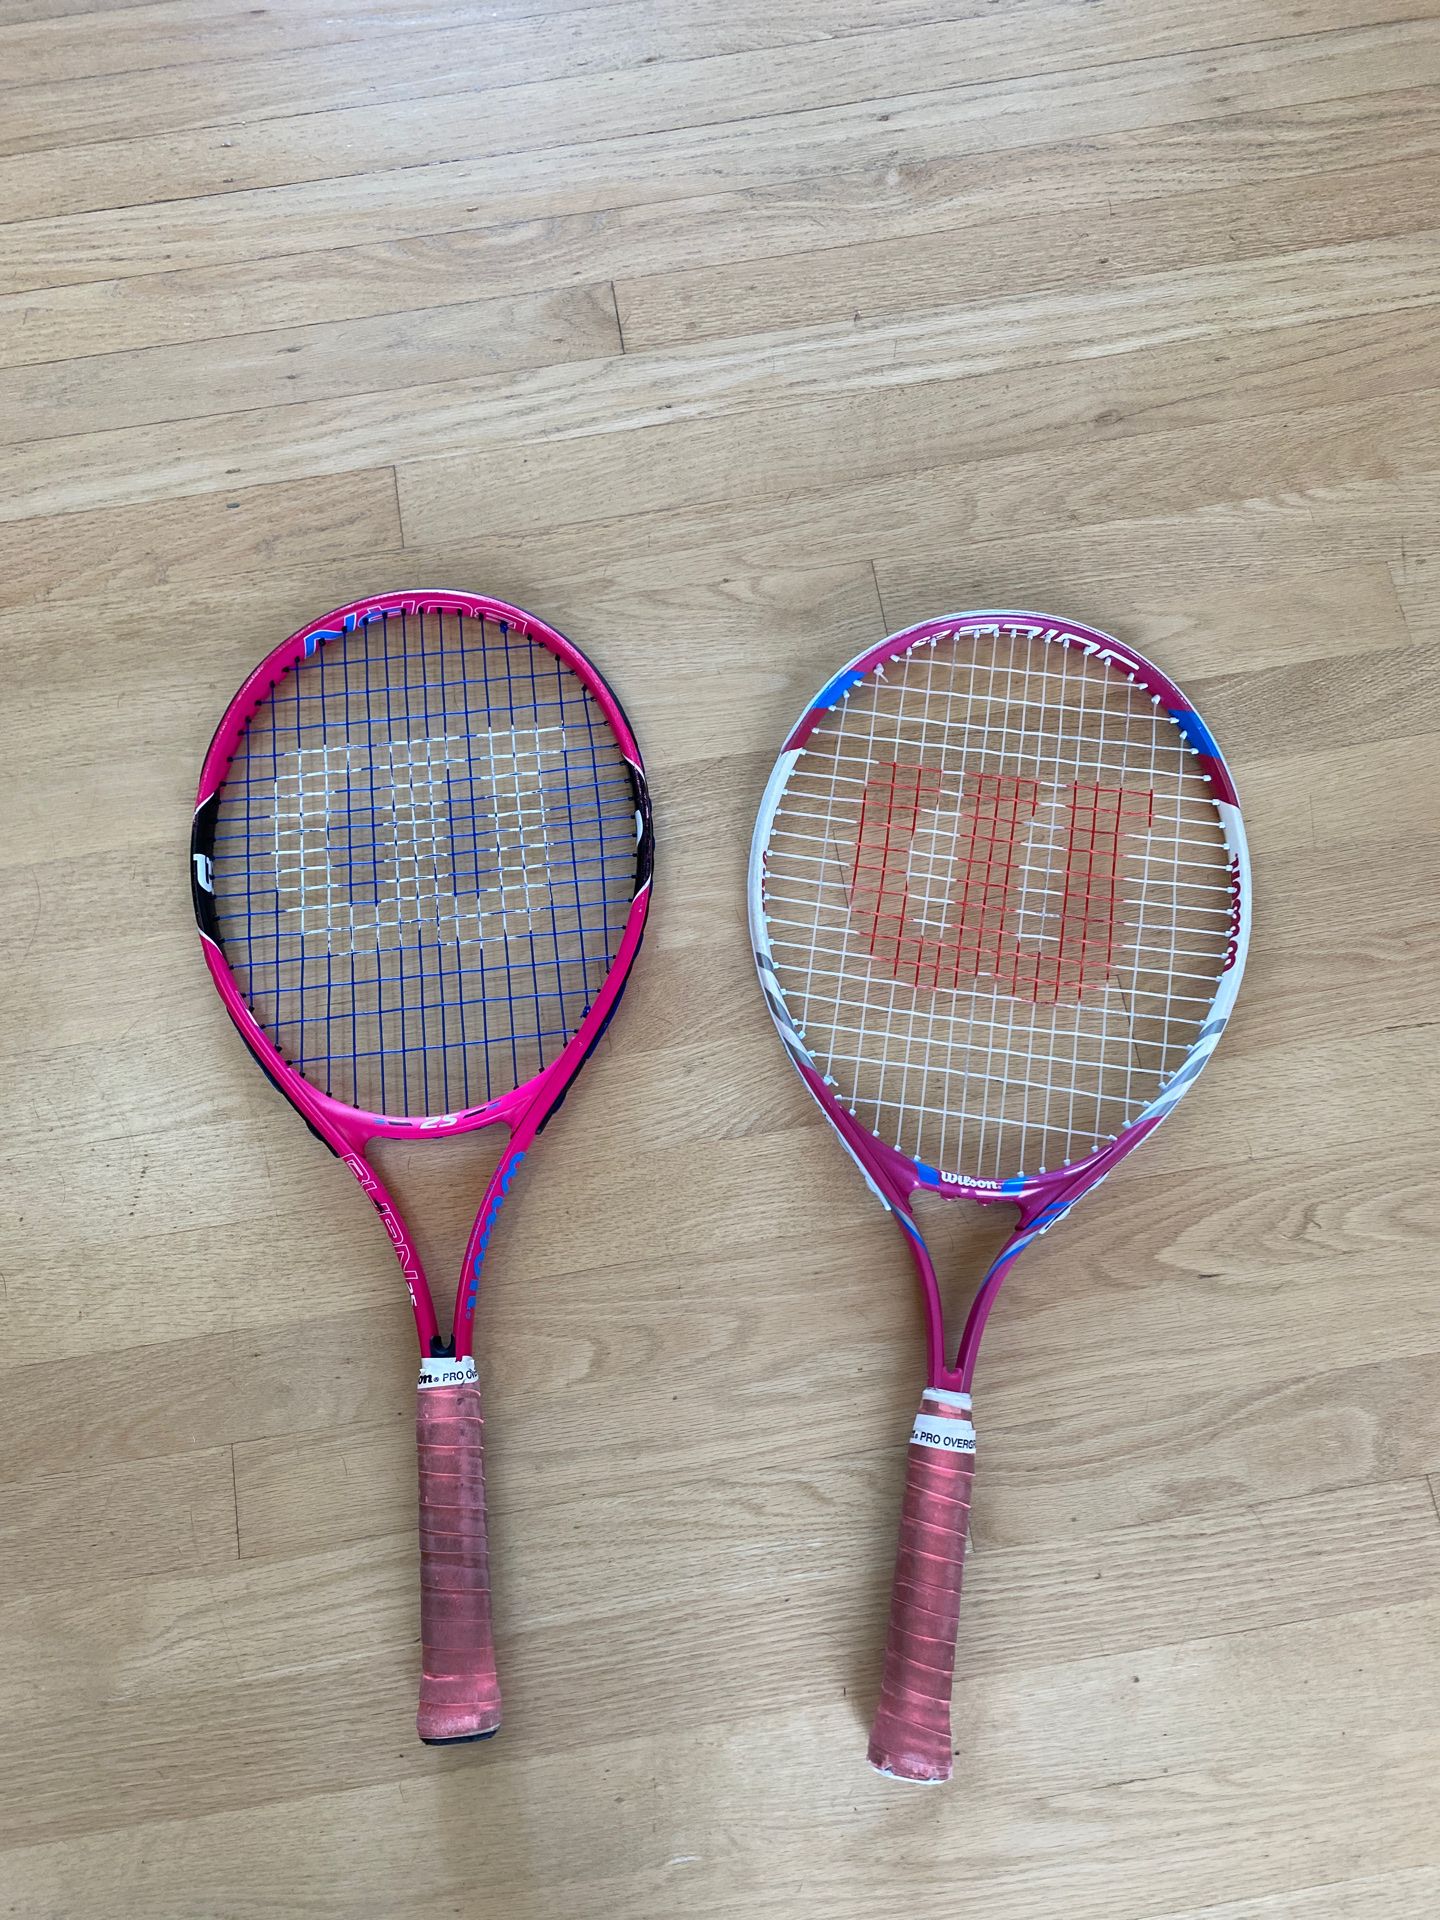 Girl’s Wilson Tennis Rackets. 25”. Good shape. Used for 2 seasons while learning. $15 each